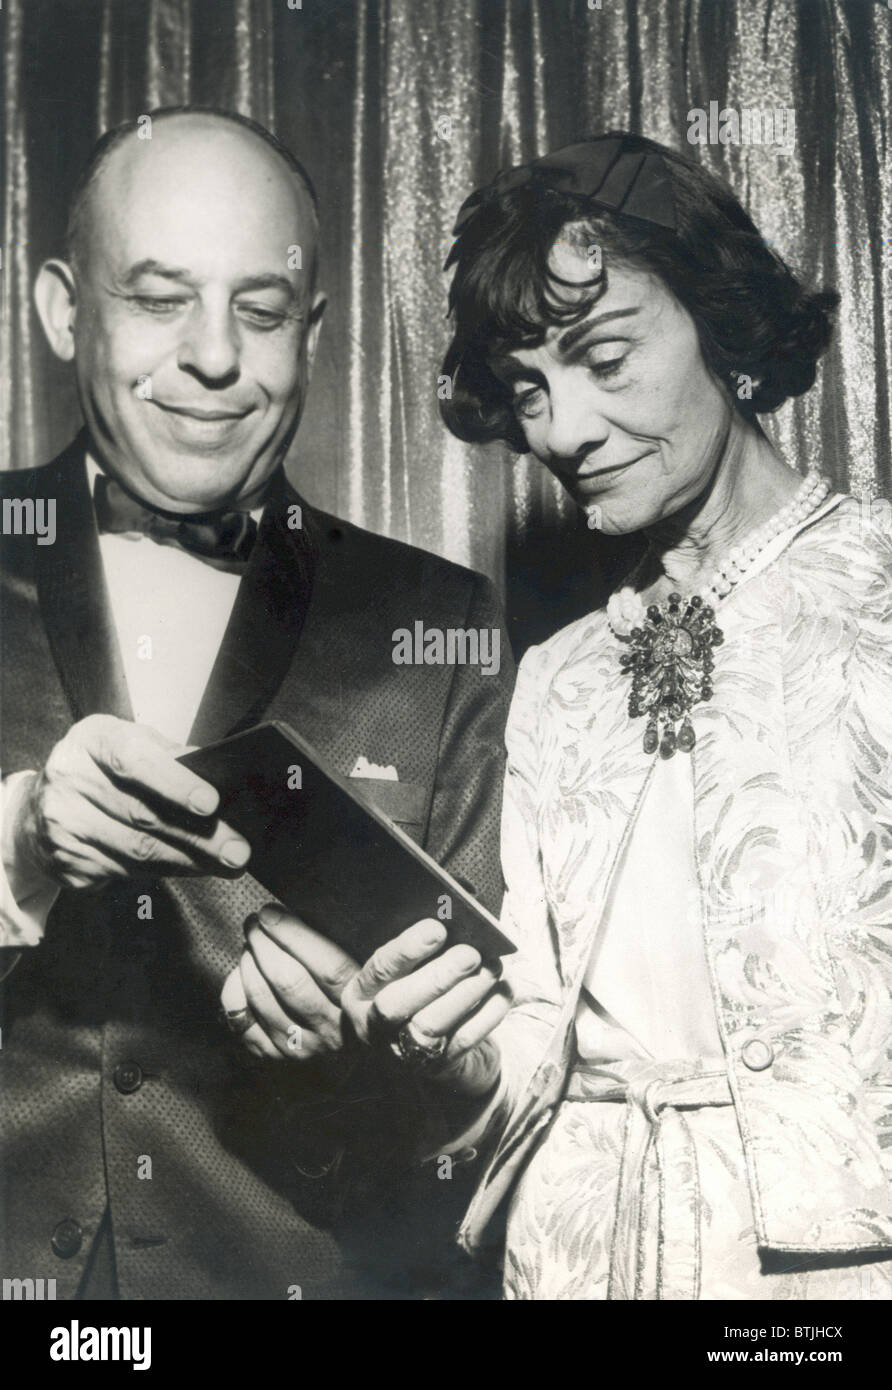 GABRIELLE 'COCO' CHANEL, being presented an award, c. early 1960s